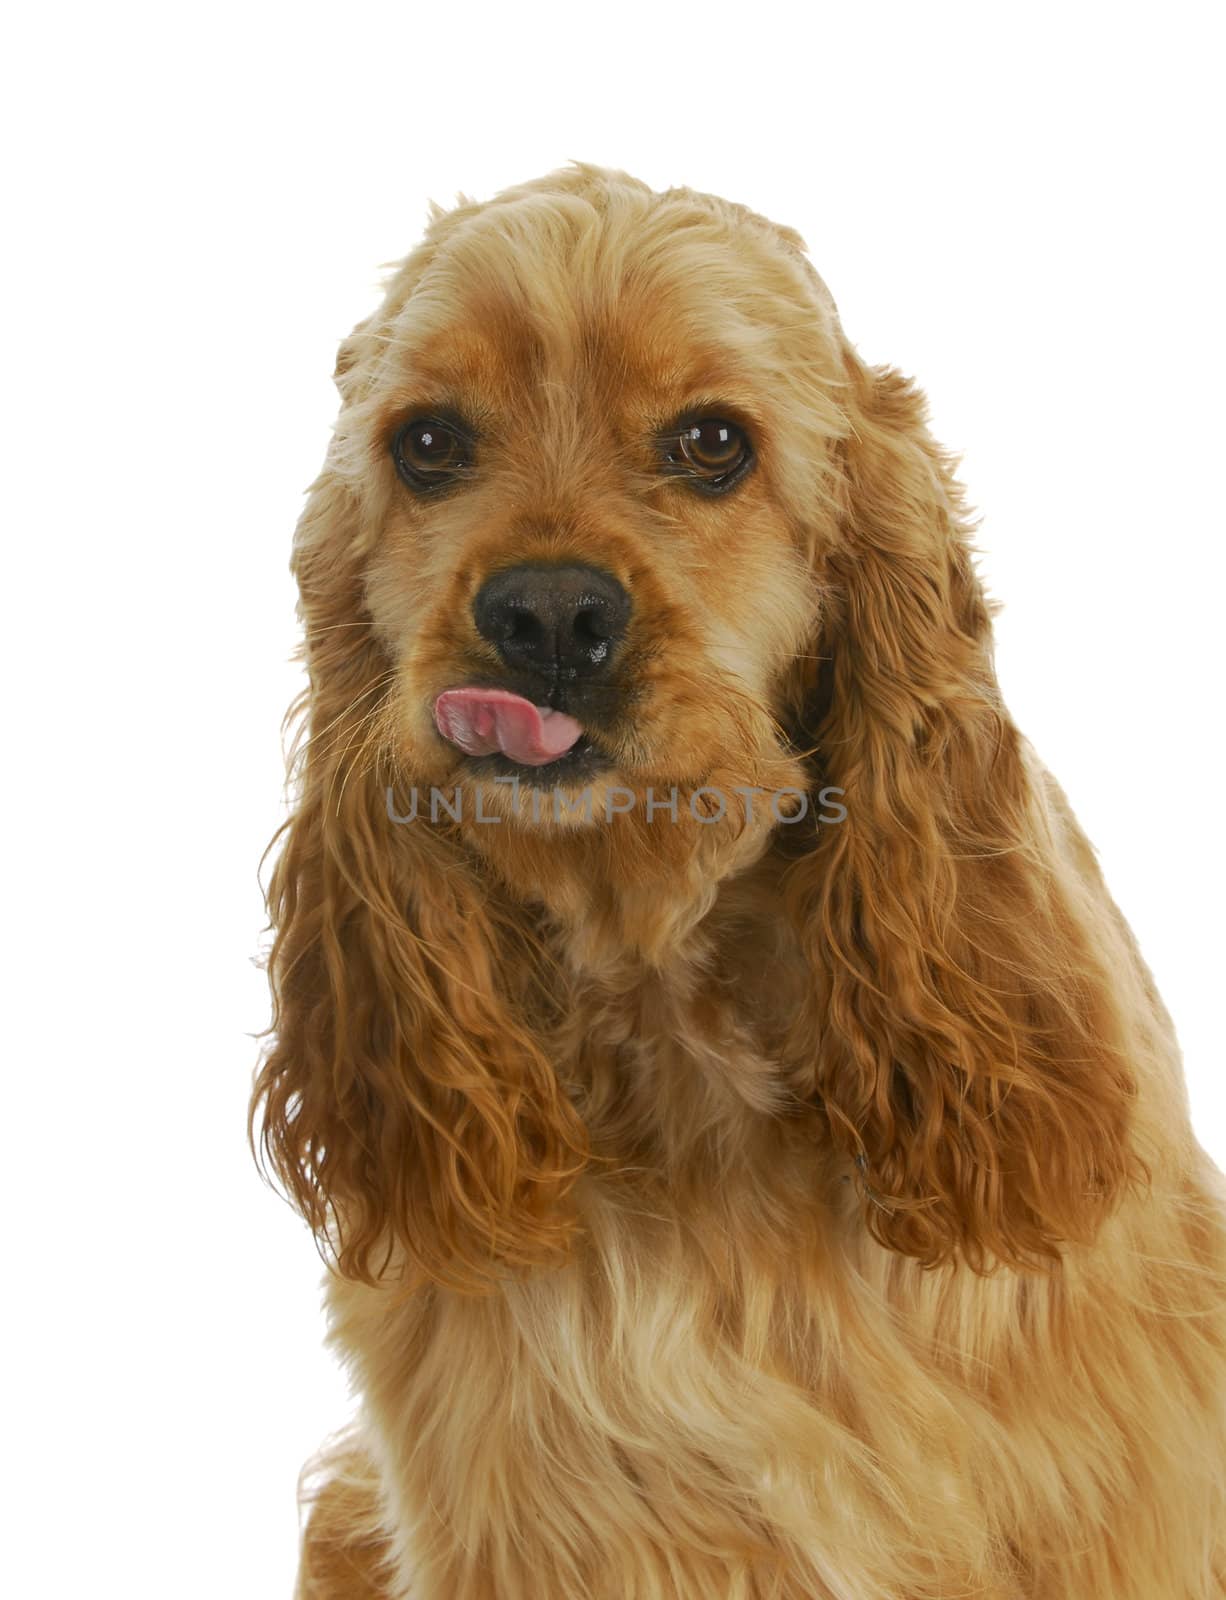 dog sticking tongue out - american cocker spaniel giving attitude isolated on white background